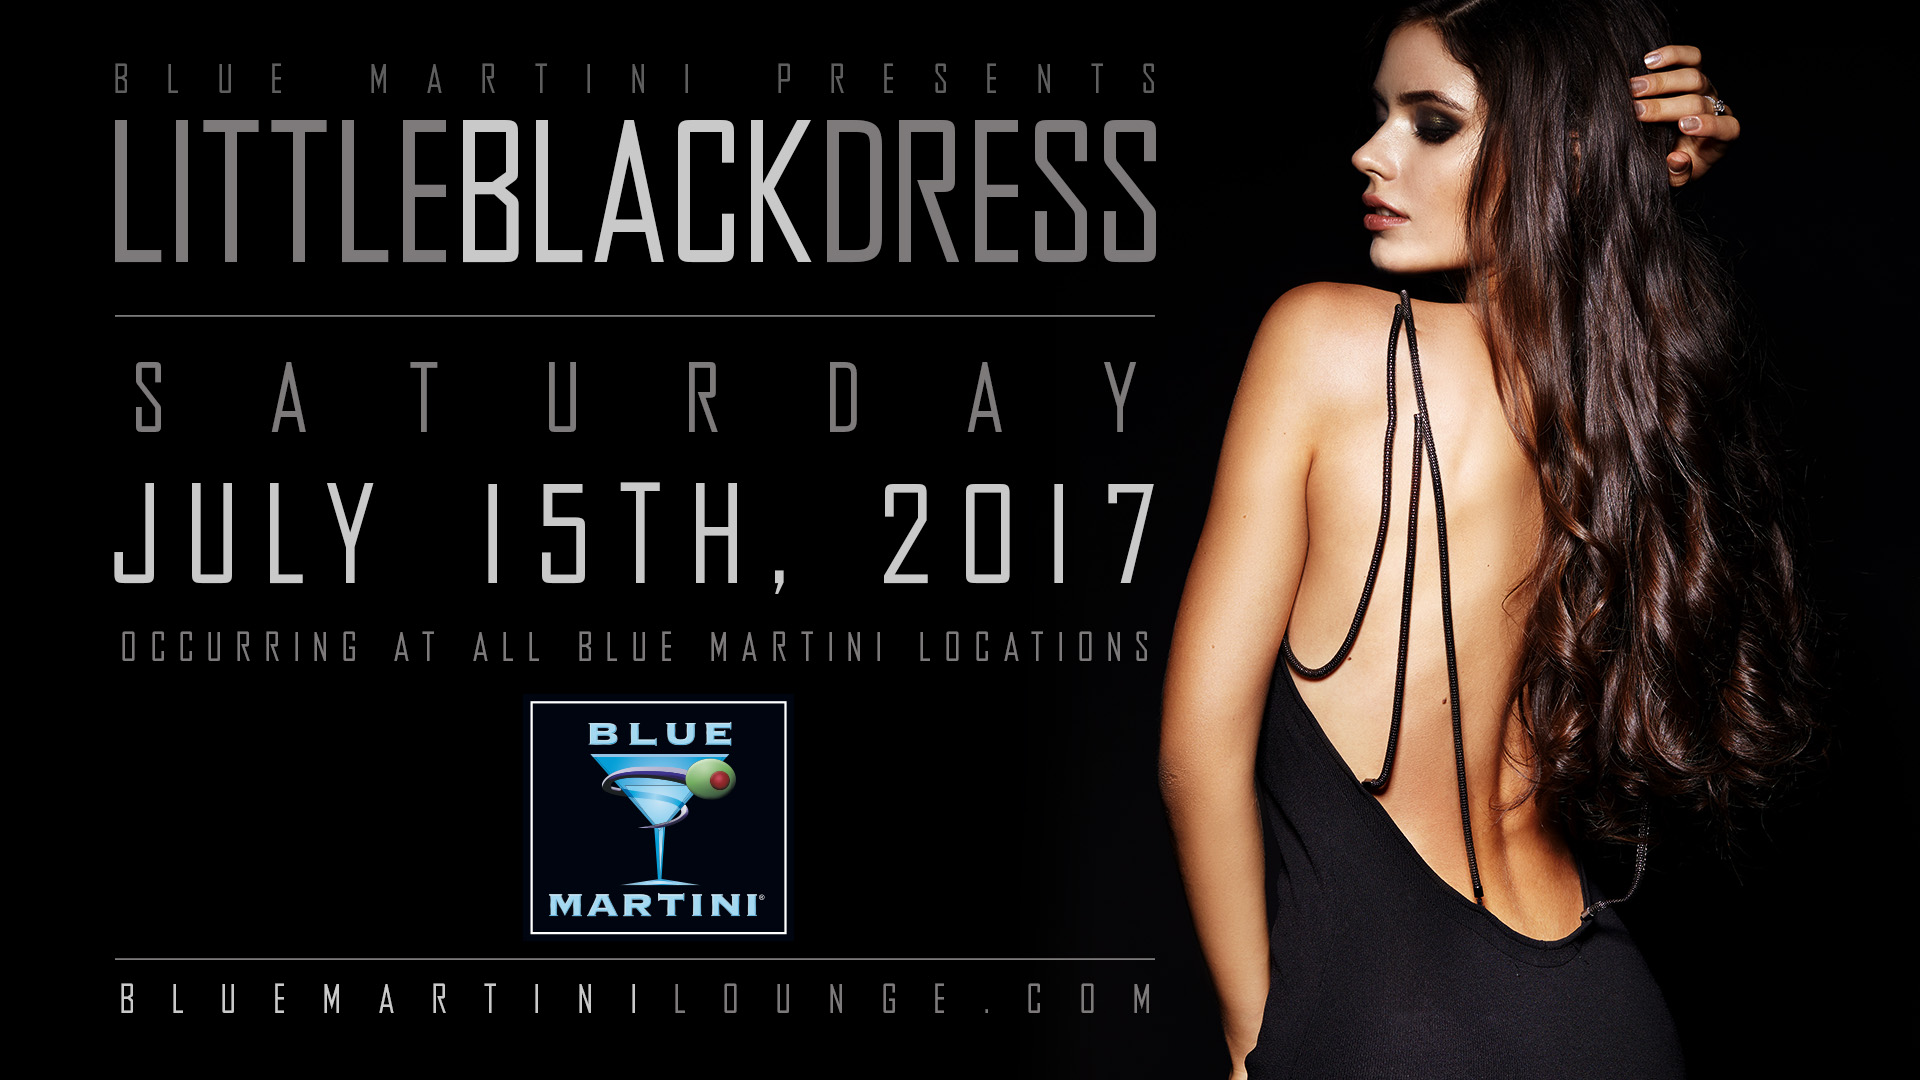 Bring your besties to the Little Black Dress Party, July 15th